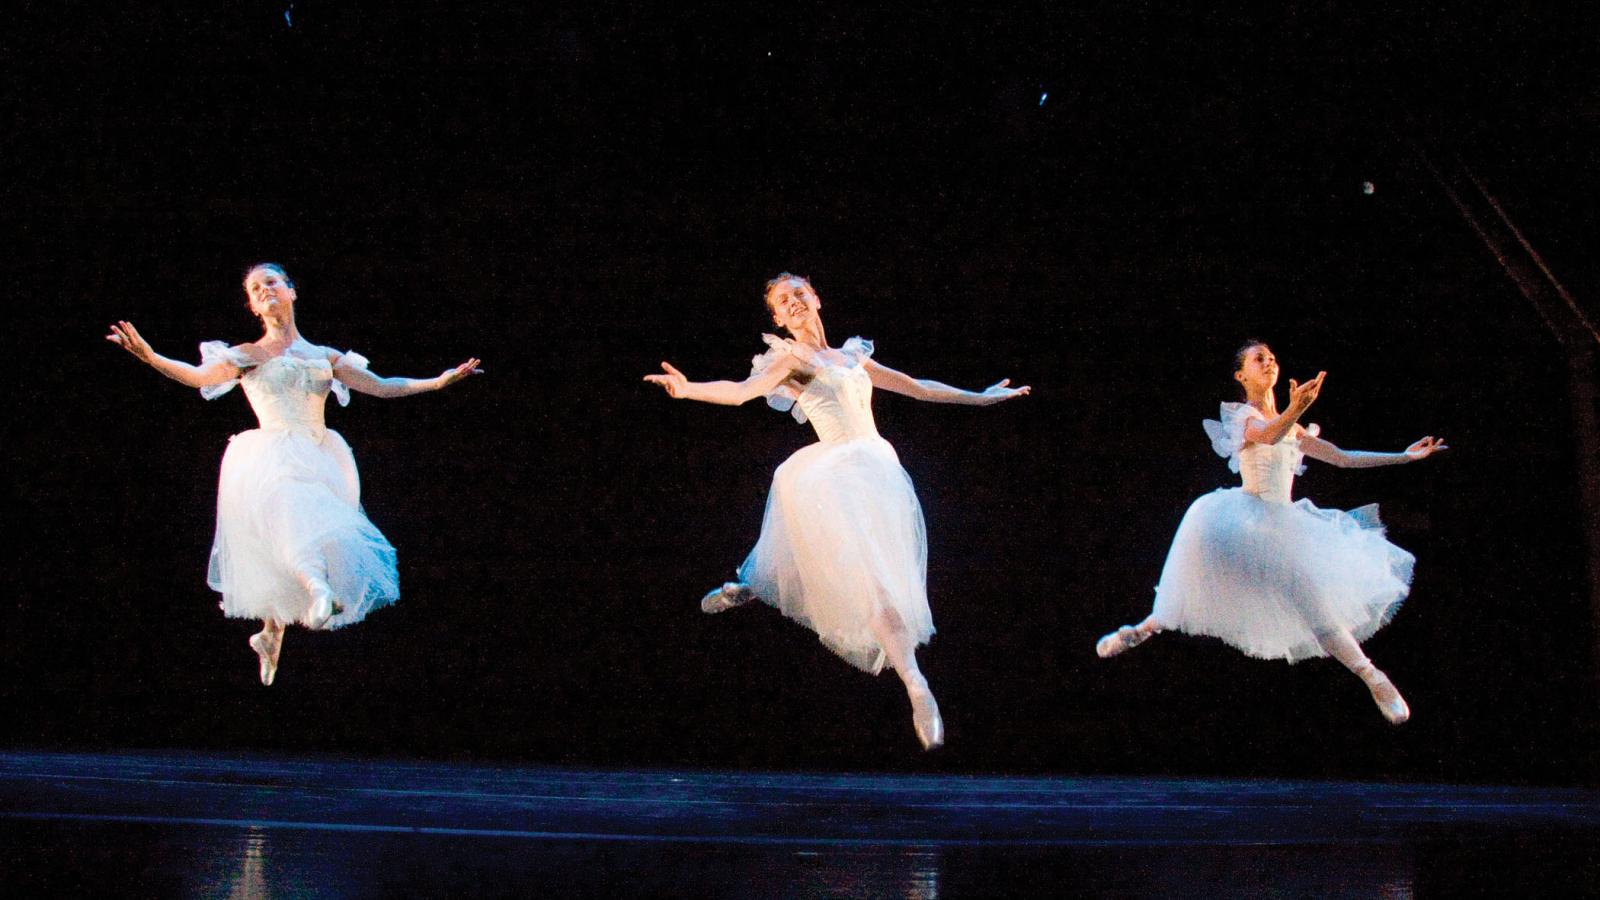 Three female ballerinas jumping onstage in white outfits as they perform. 